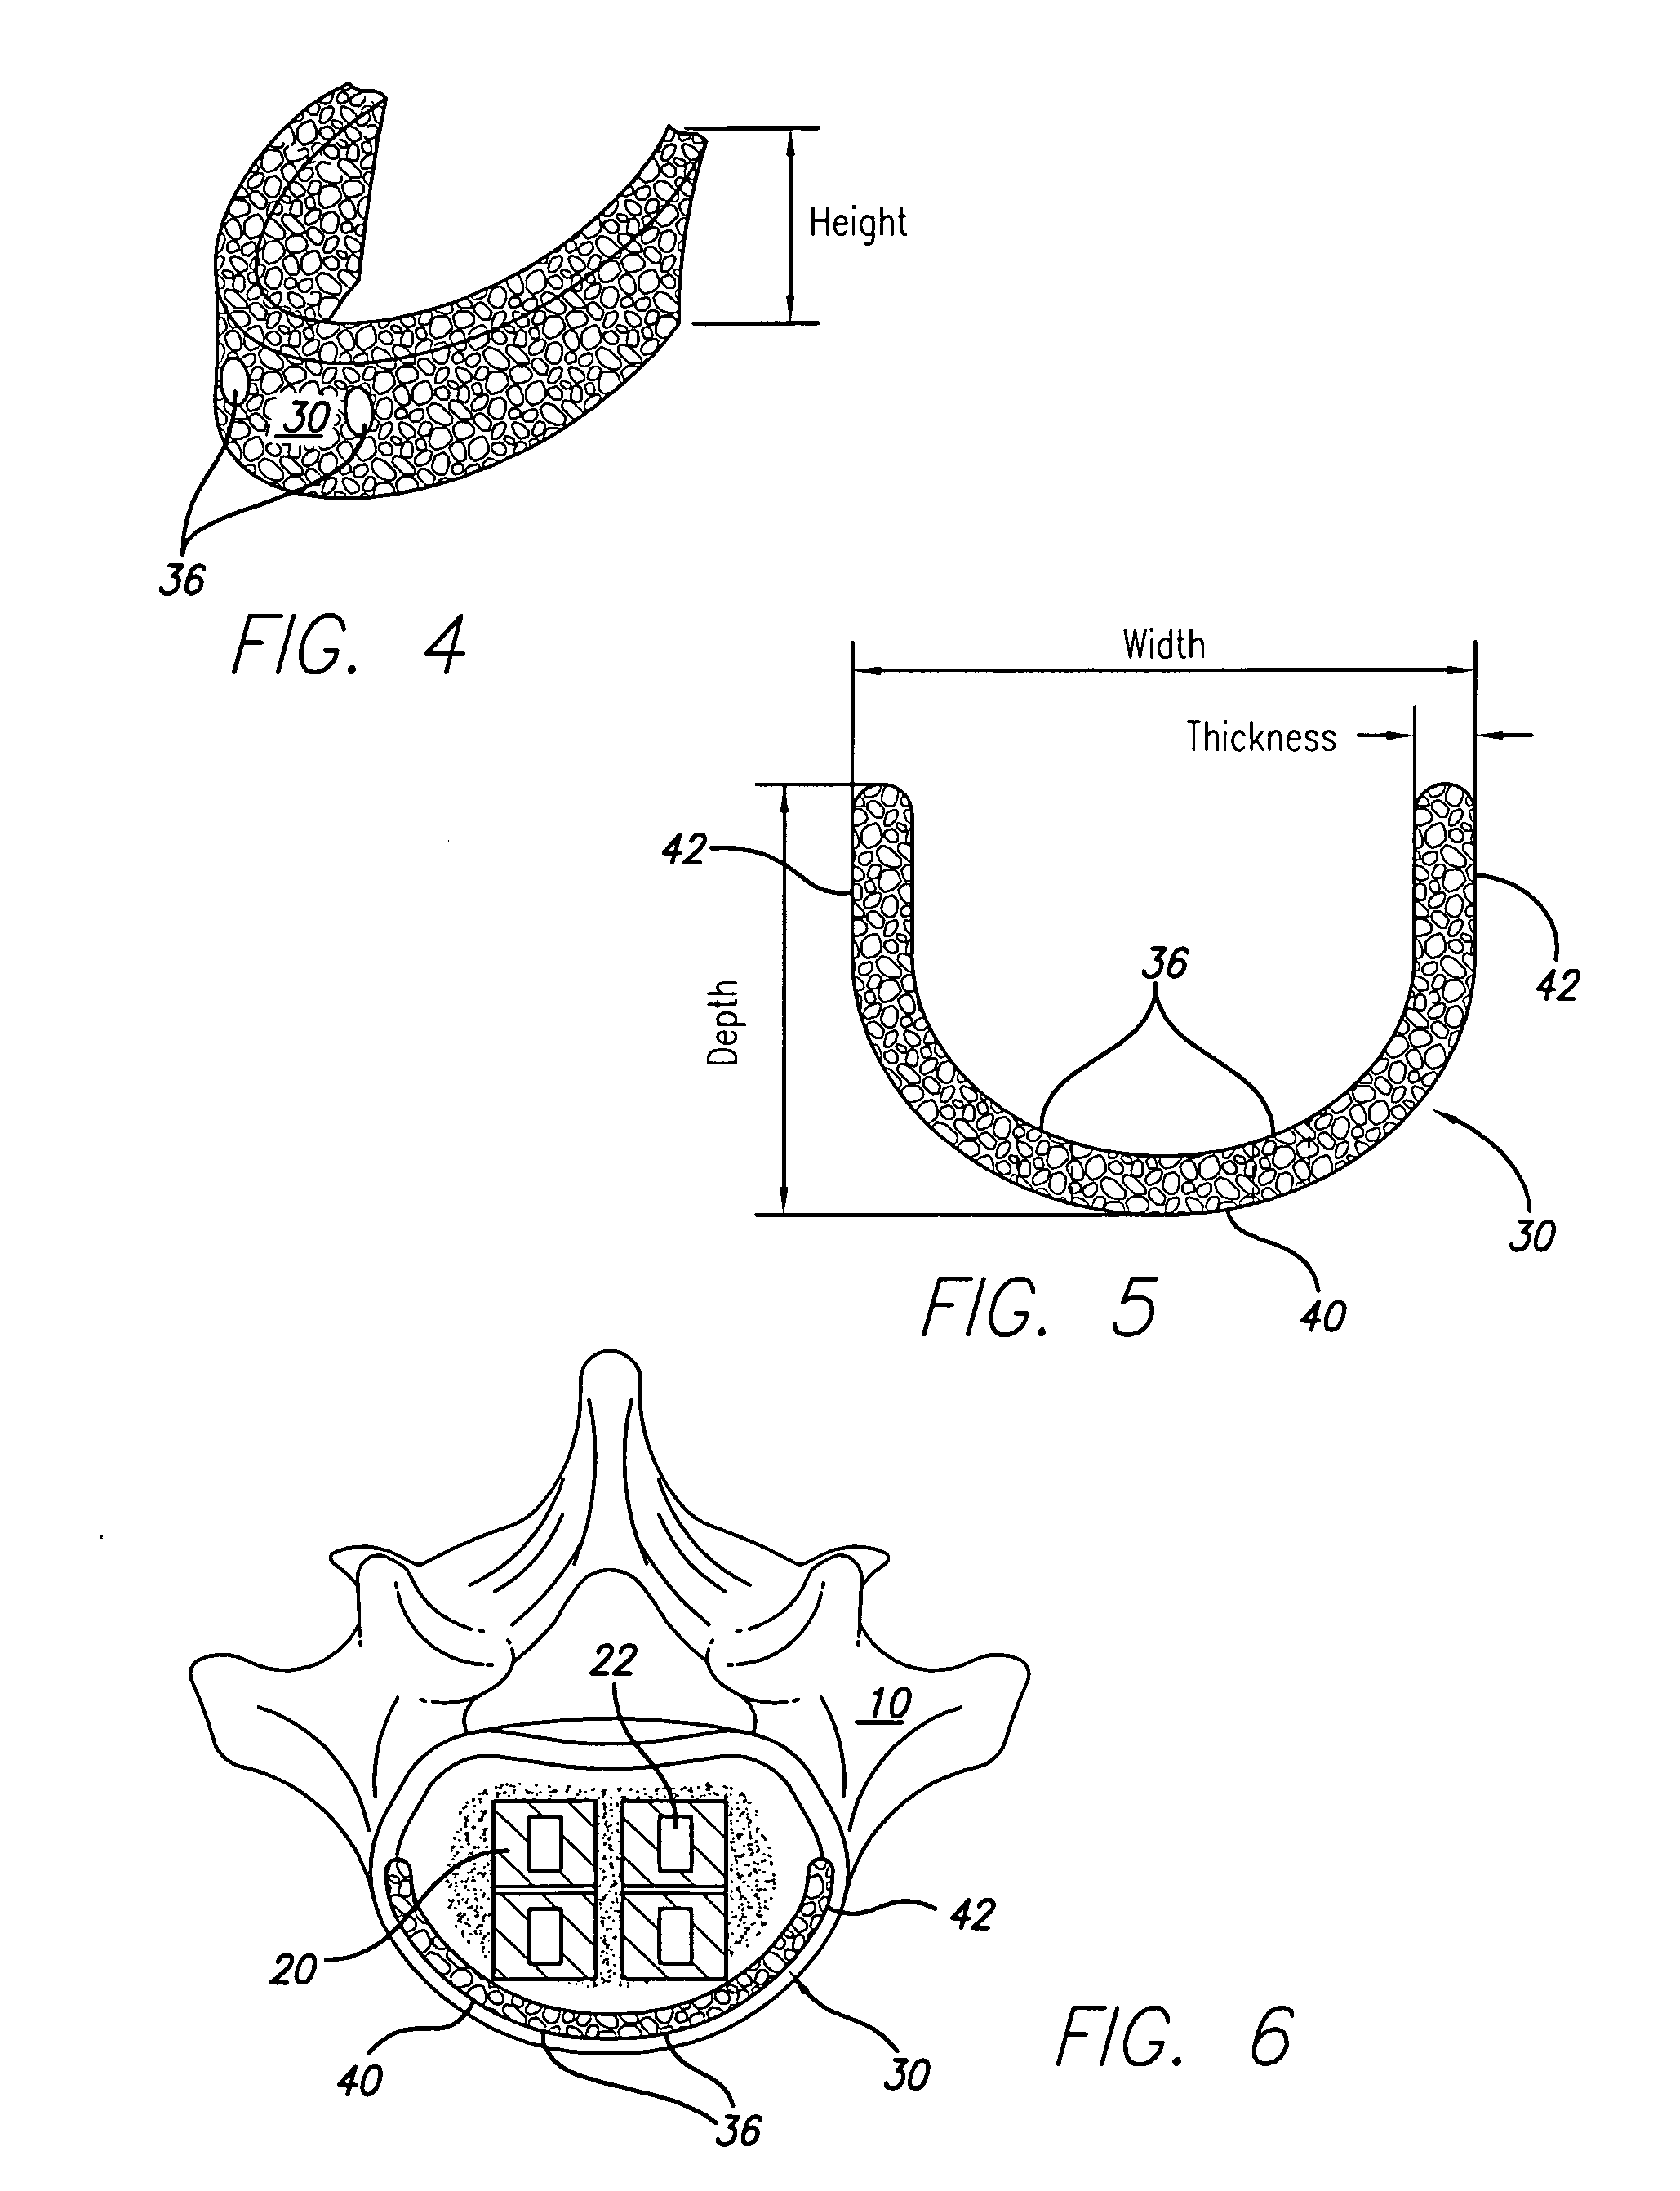 Support device for vertebral fusion